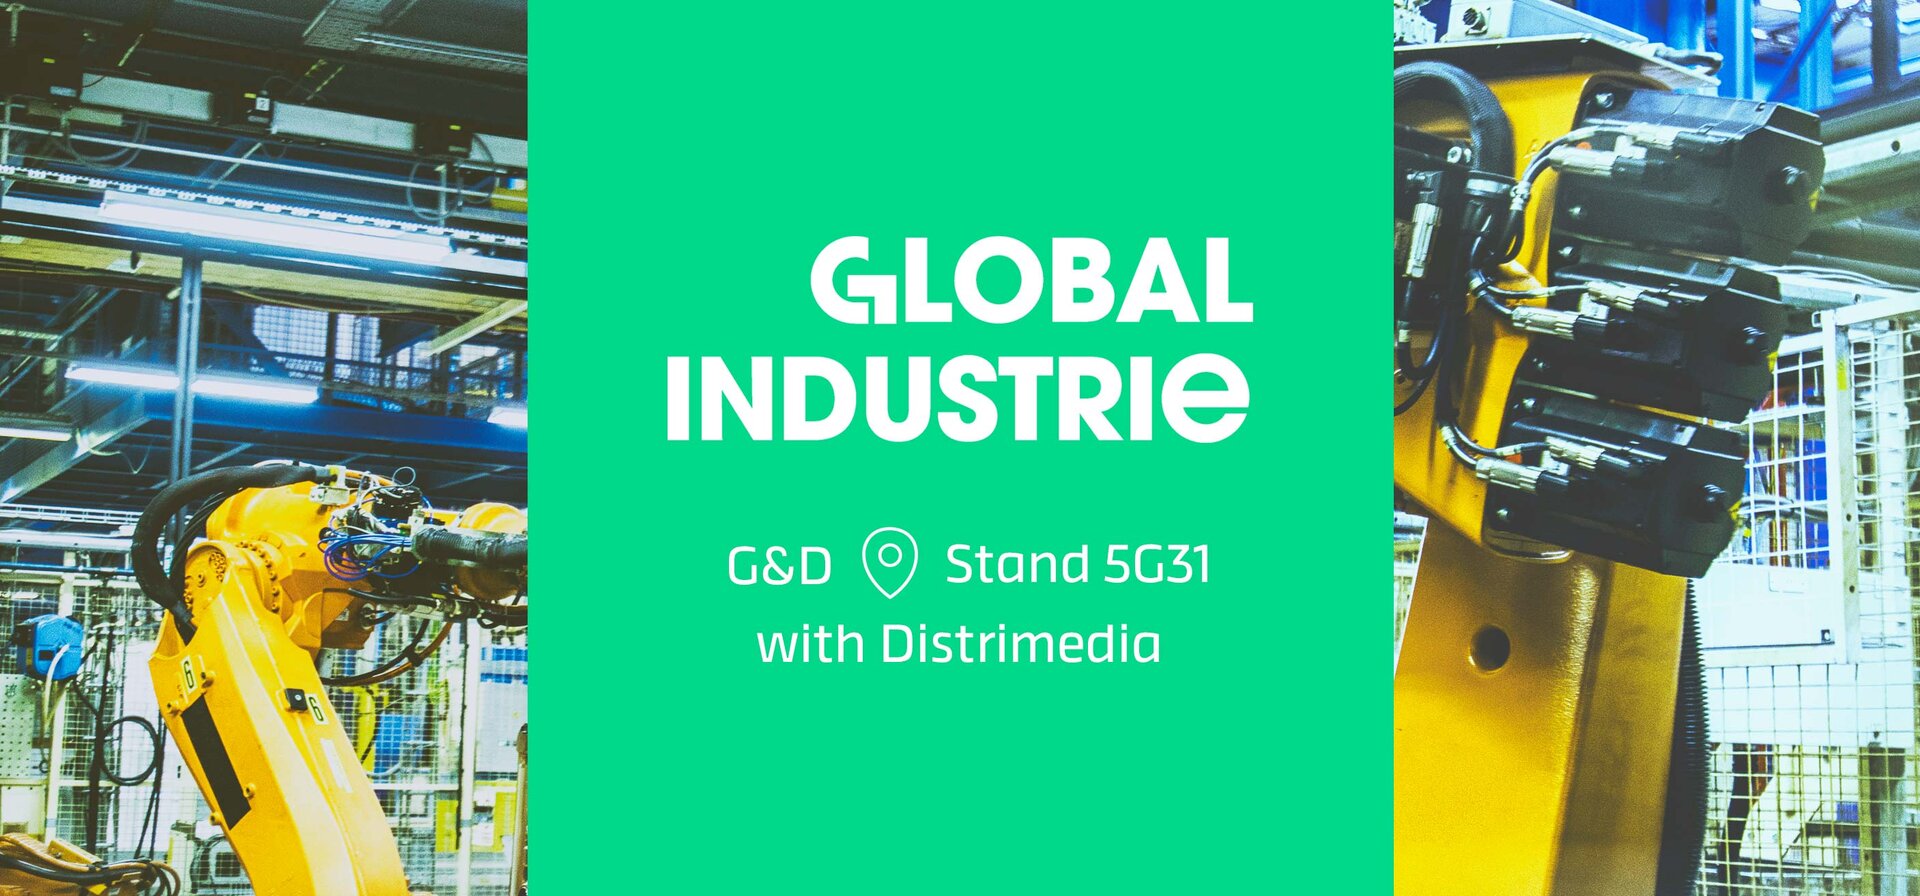 G&D at Global Industrie